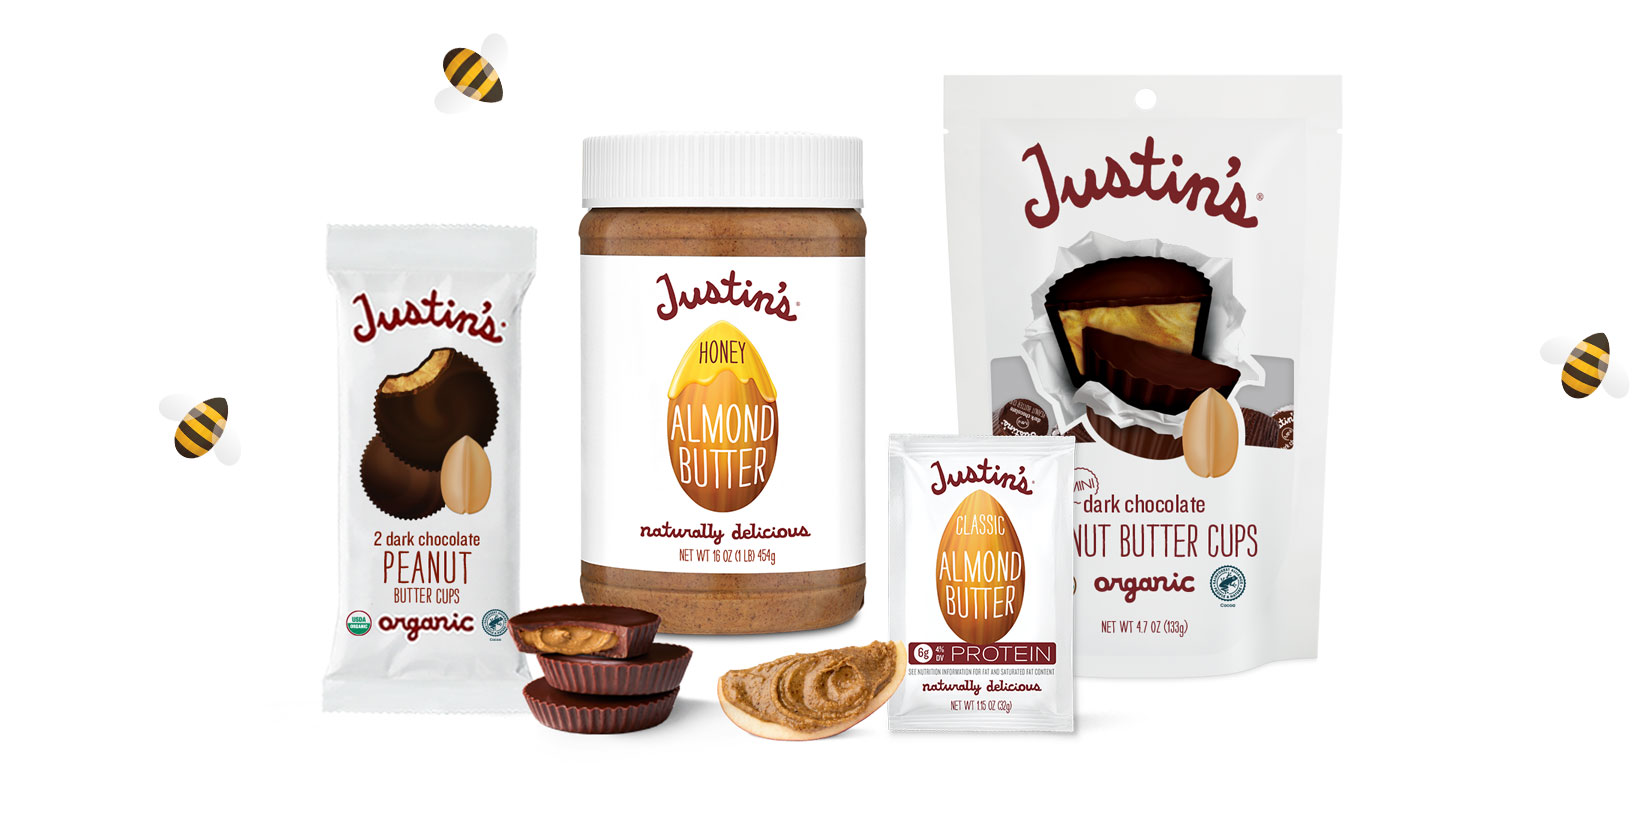 some JUSTIN'S products that depend on pollination